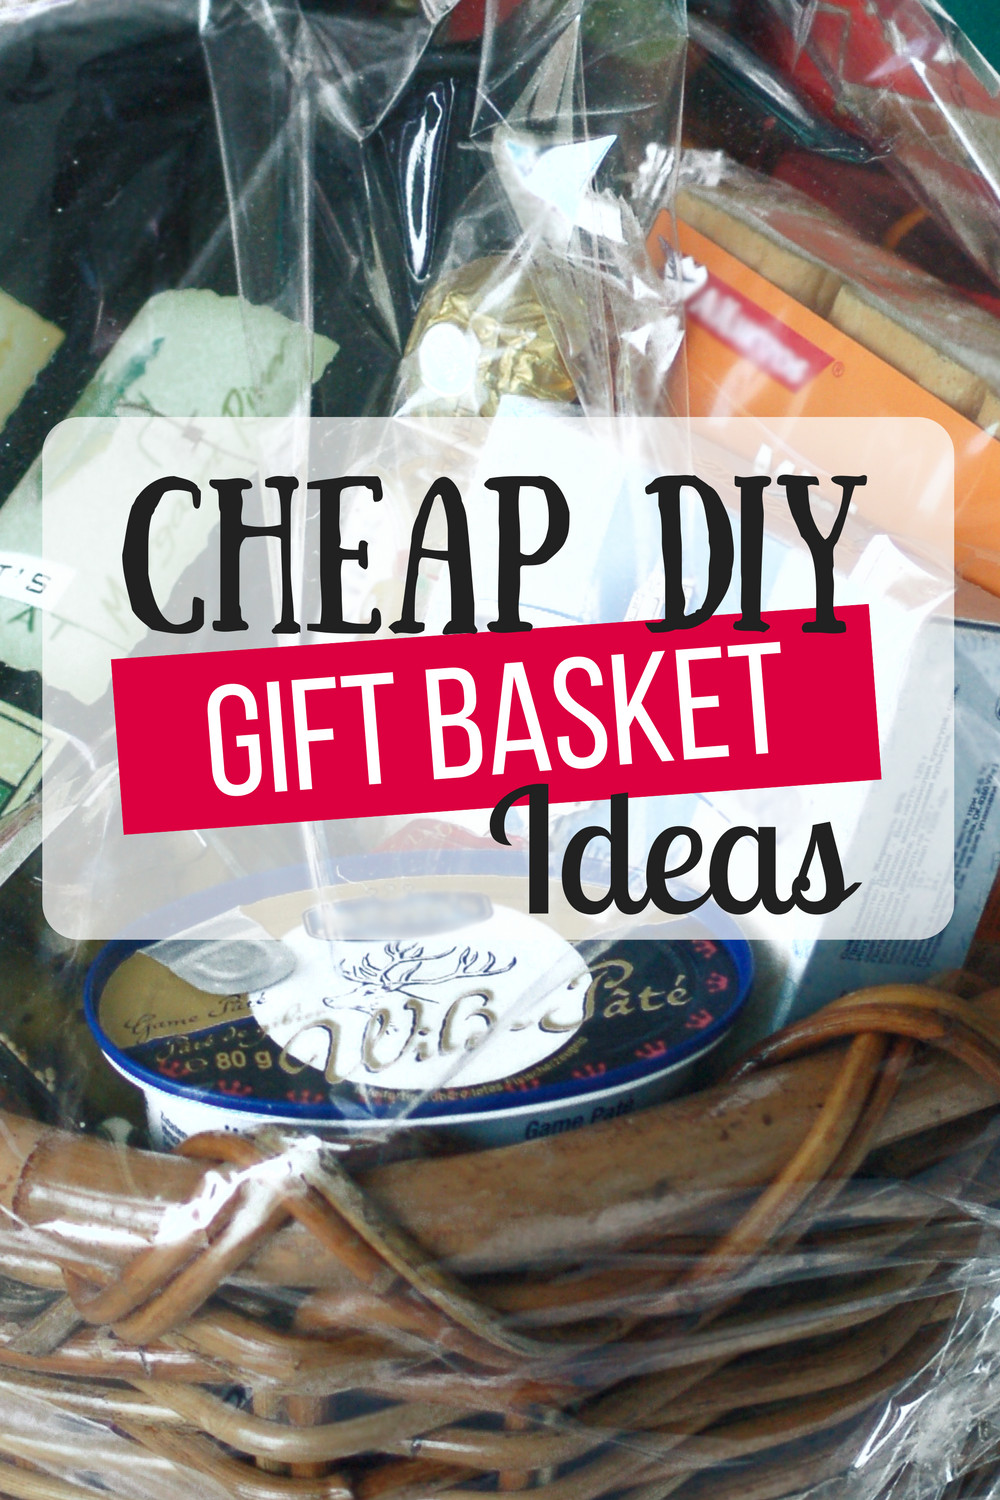 Making Gift Baskets Ideas
 Cheap DIY Gift Baskets The Busy Bud er